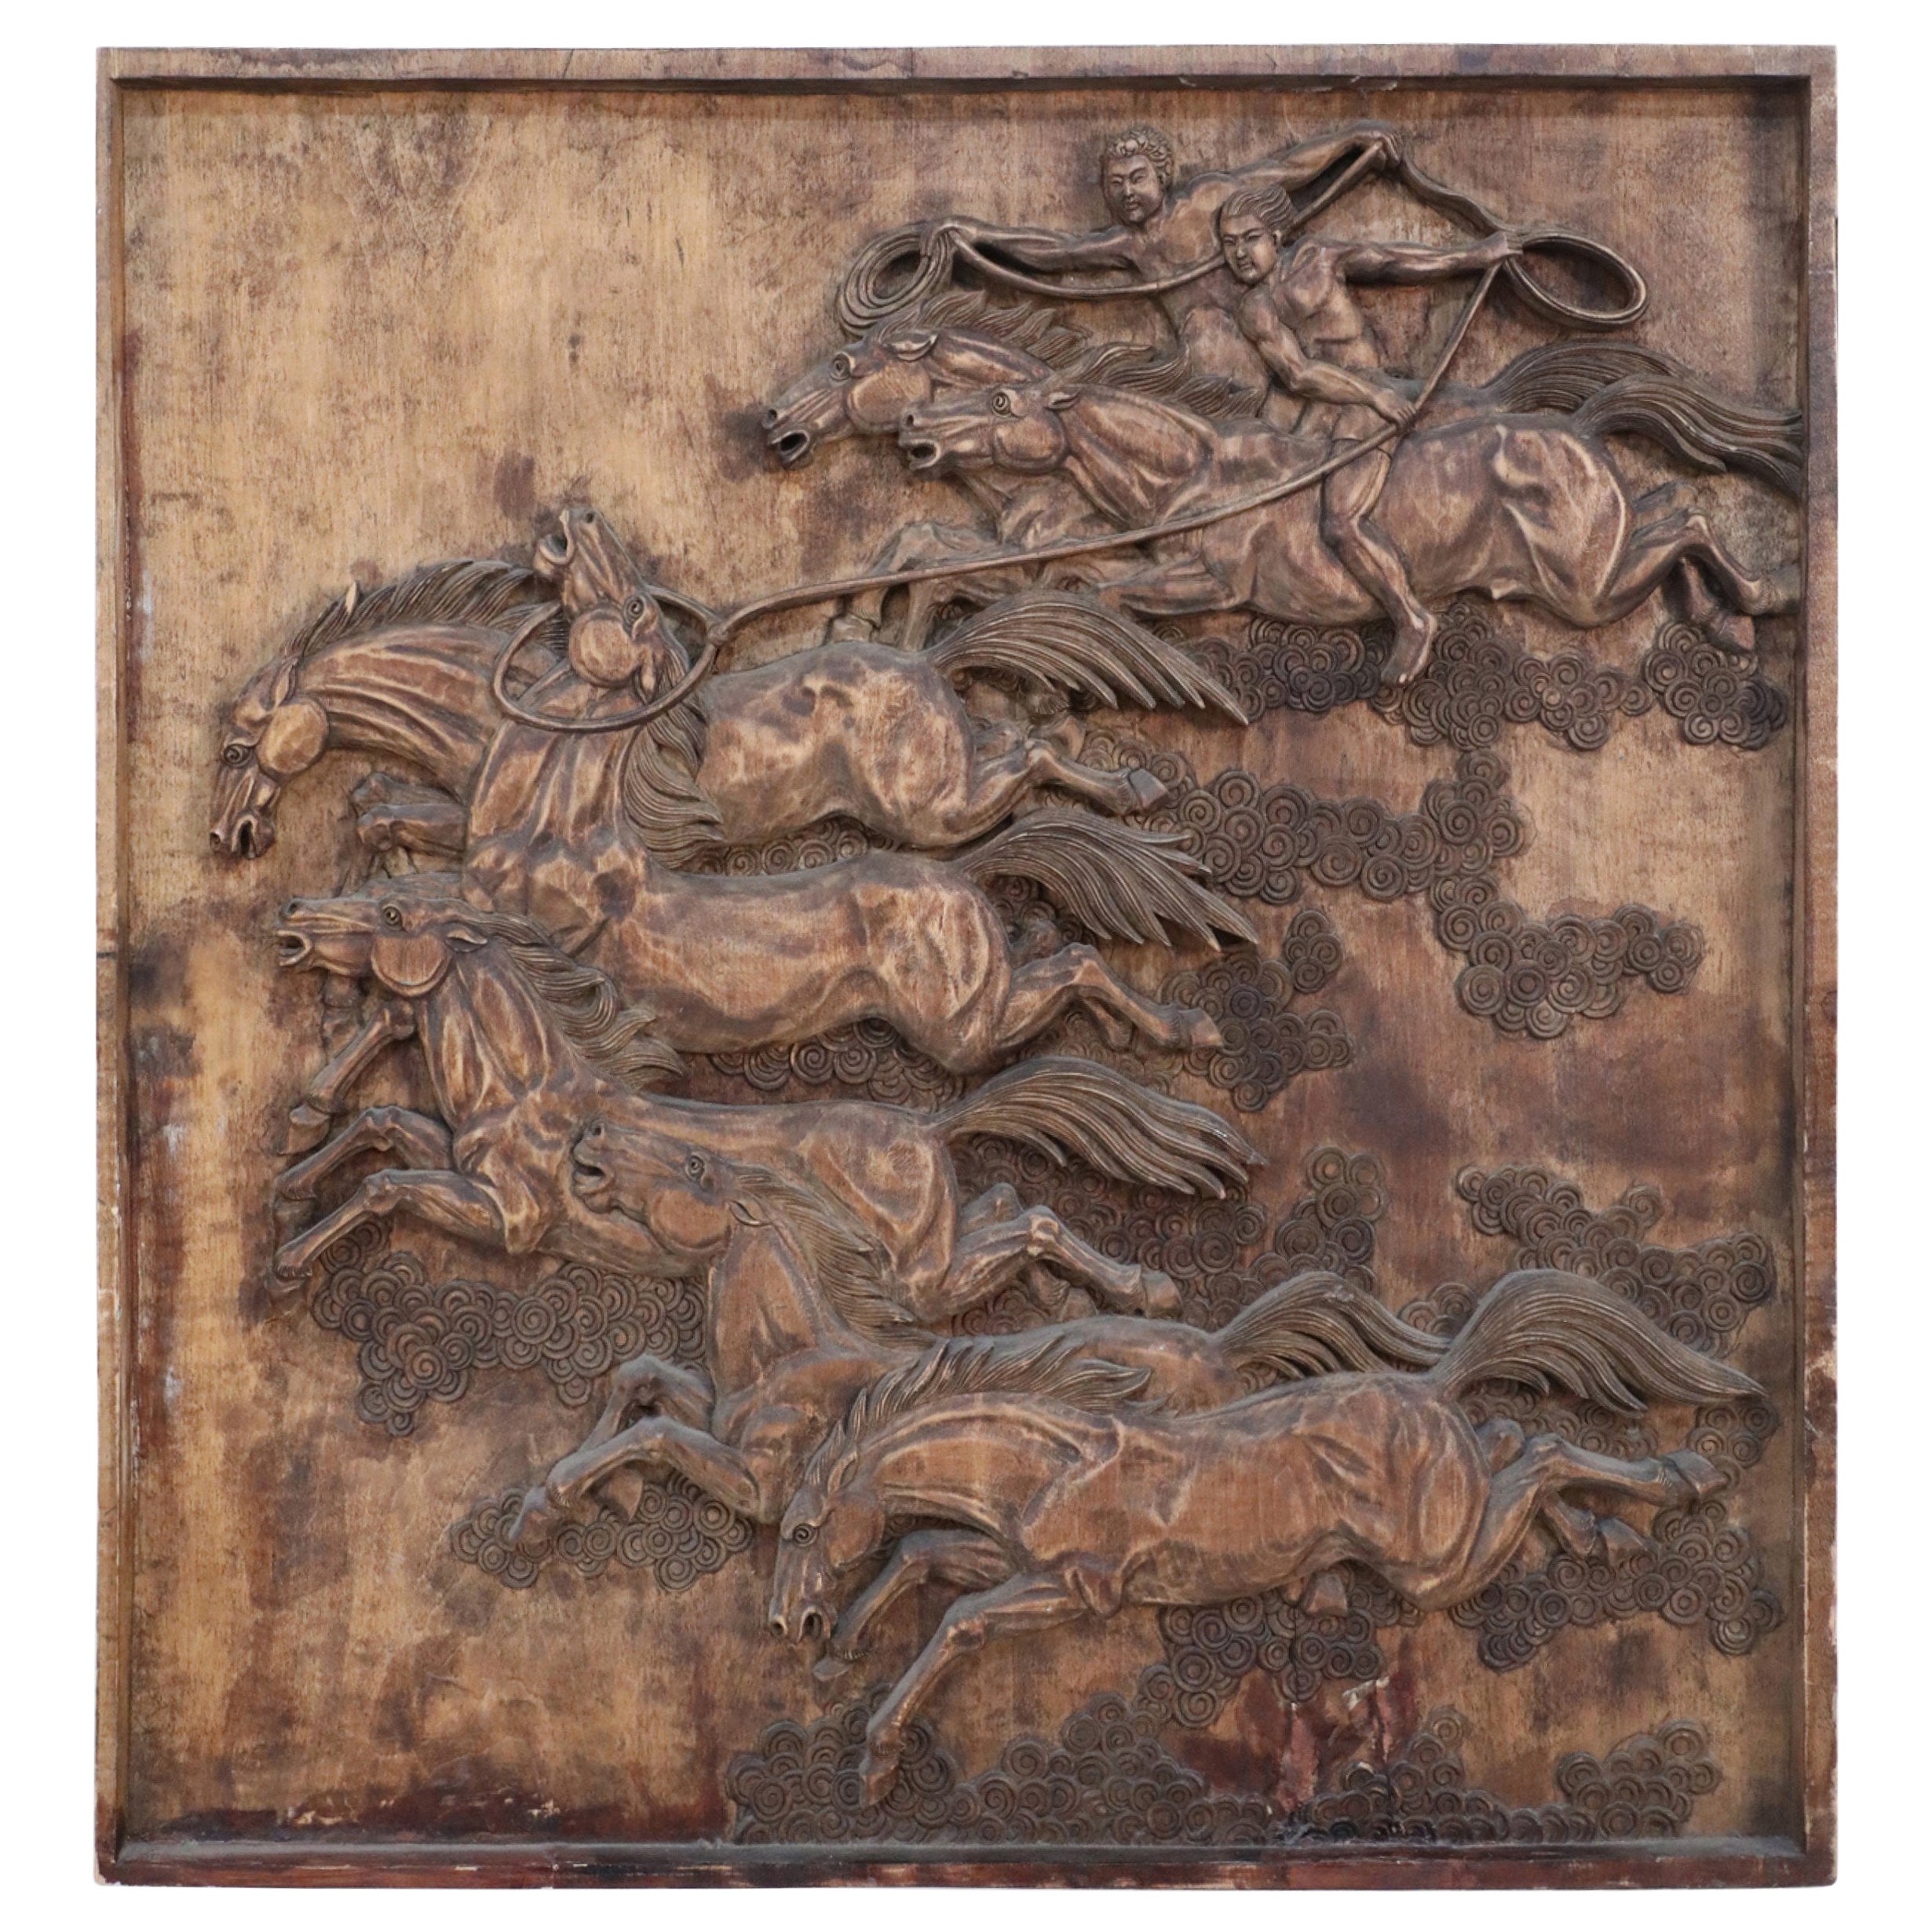 Chinese Carved Wooden Wall Plaque Depicting Riders on Horseback